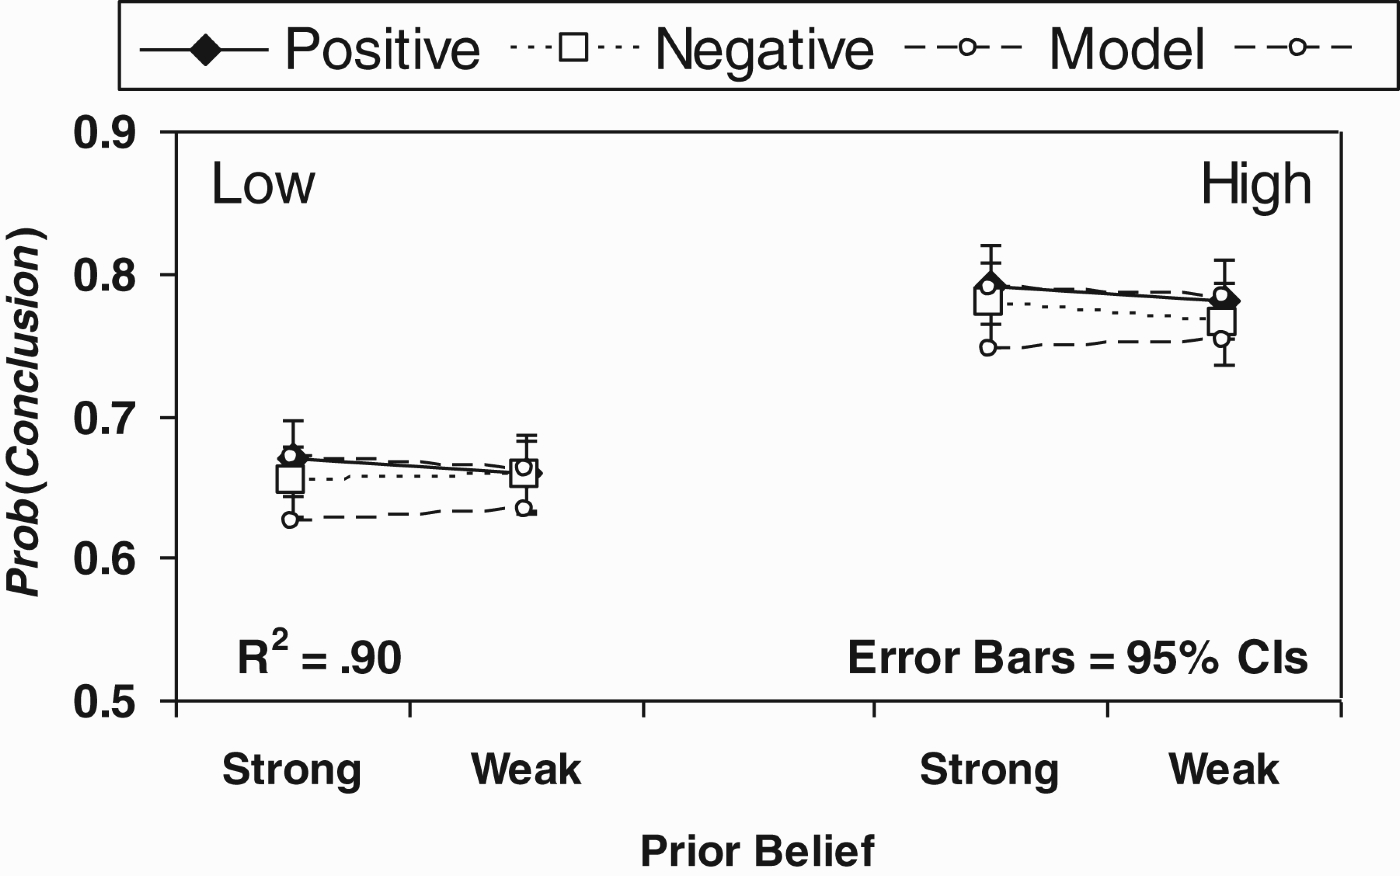 The mean acceptance ratings for Hahn et al. (2005) by source reliability (high vs. low), prior belief (strong vs. weak), and argument type (positive vs. negative) (N=73). Figure reproduced from Hahn and Oaksford (2007).